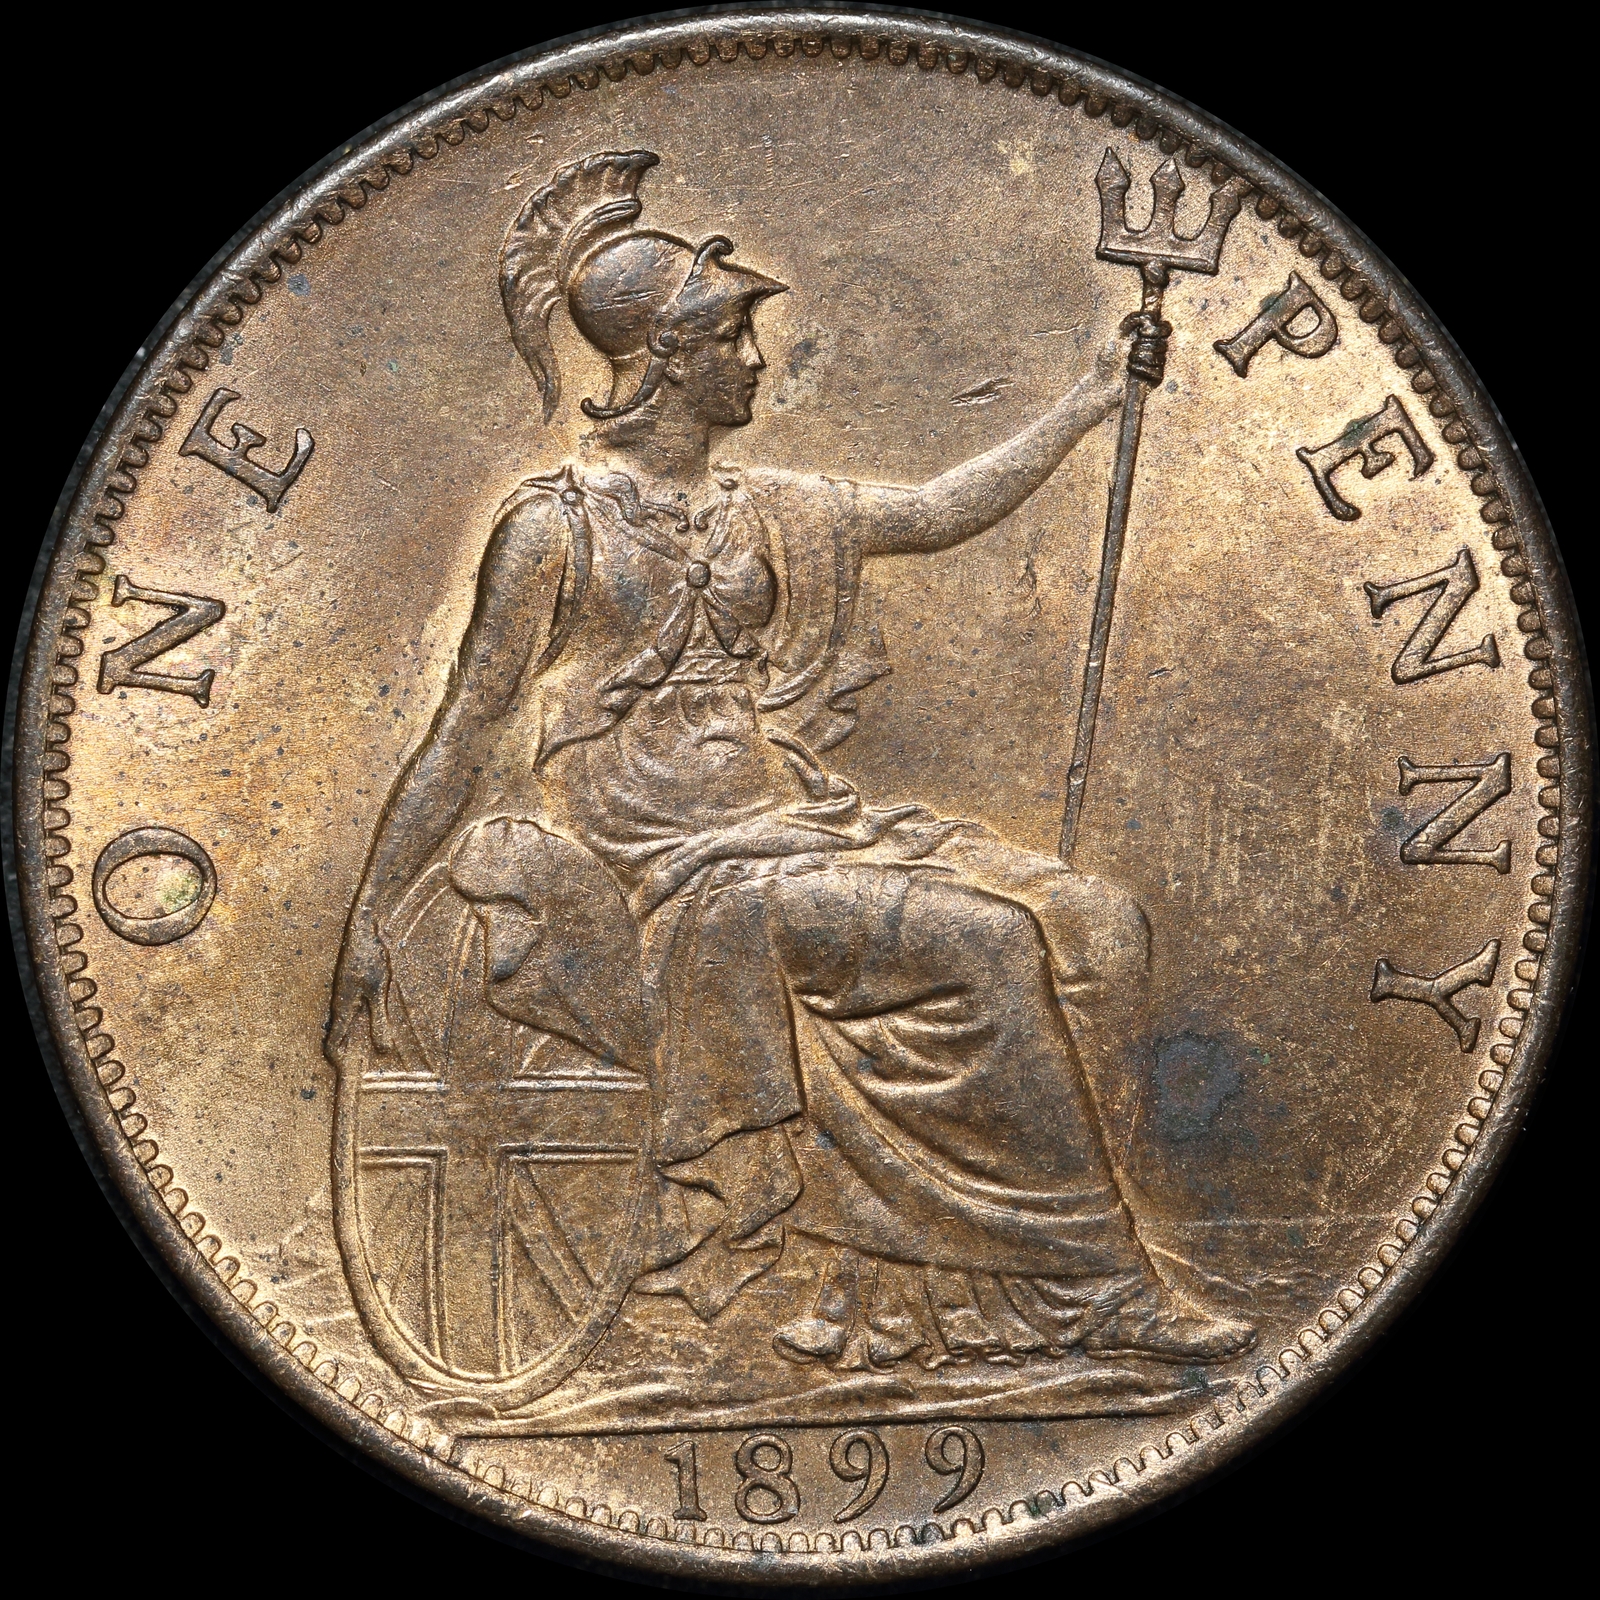 1899 Copper Penny Victoria S#3961 Uncirculated product image